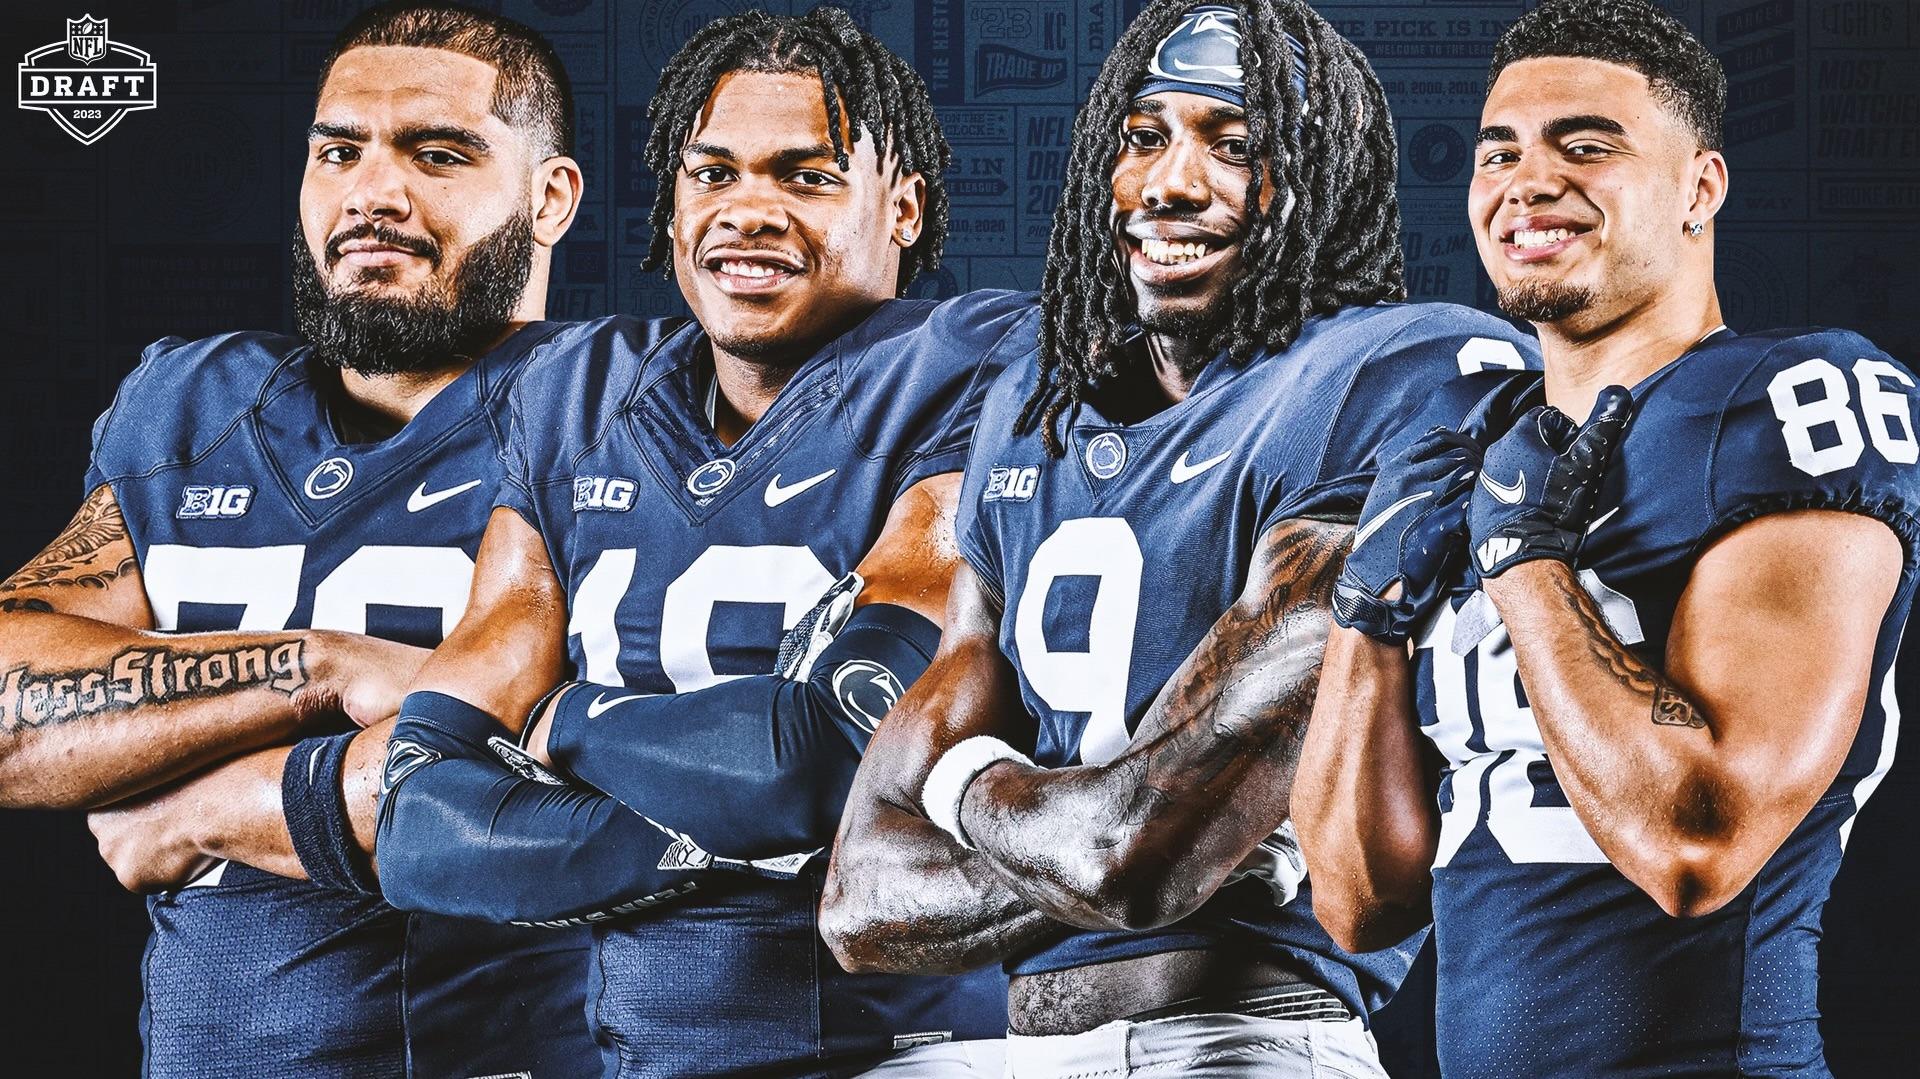 Four Nittany Lions Selected on Second Day of NFL Draft   Penn